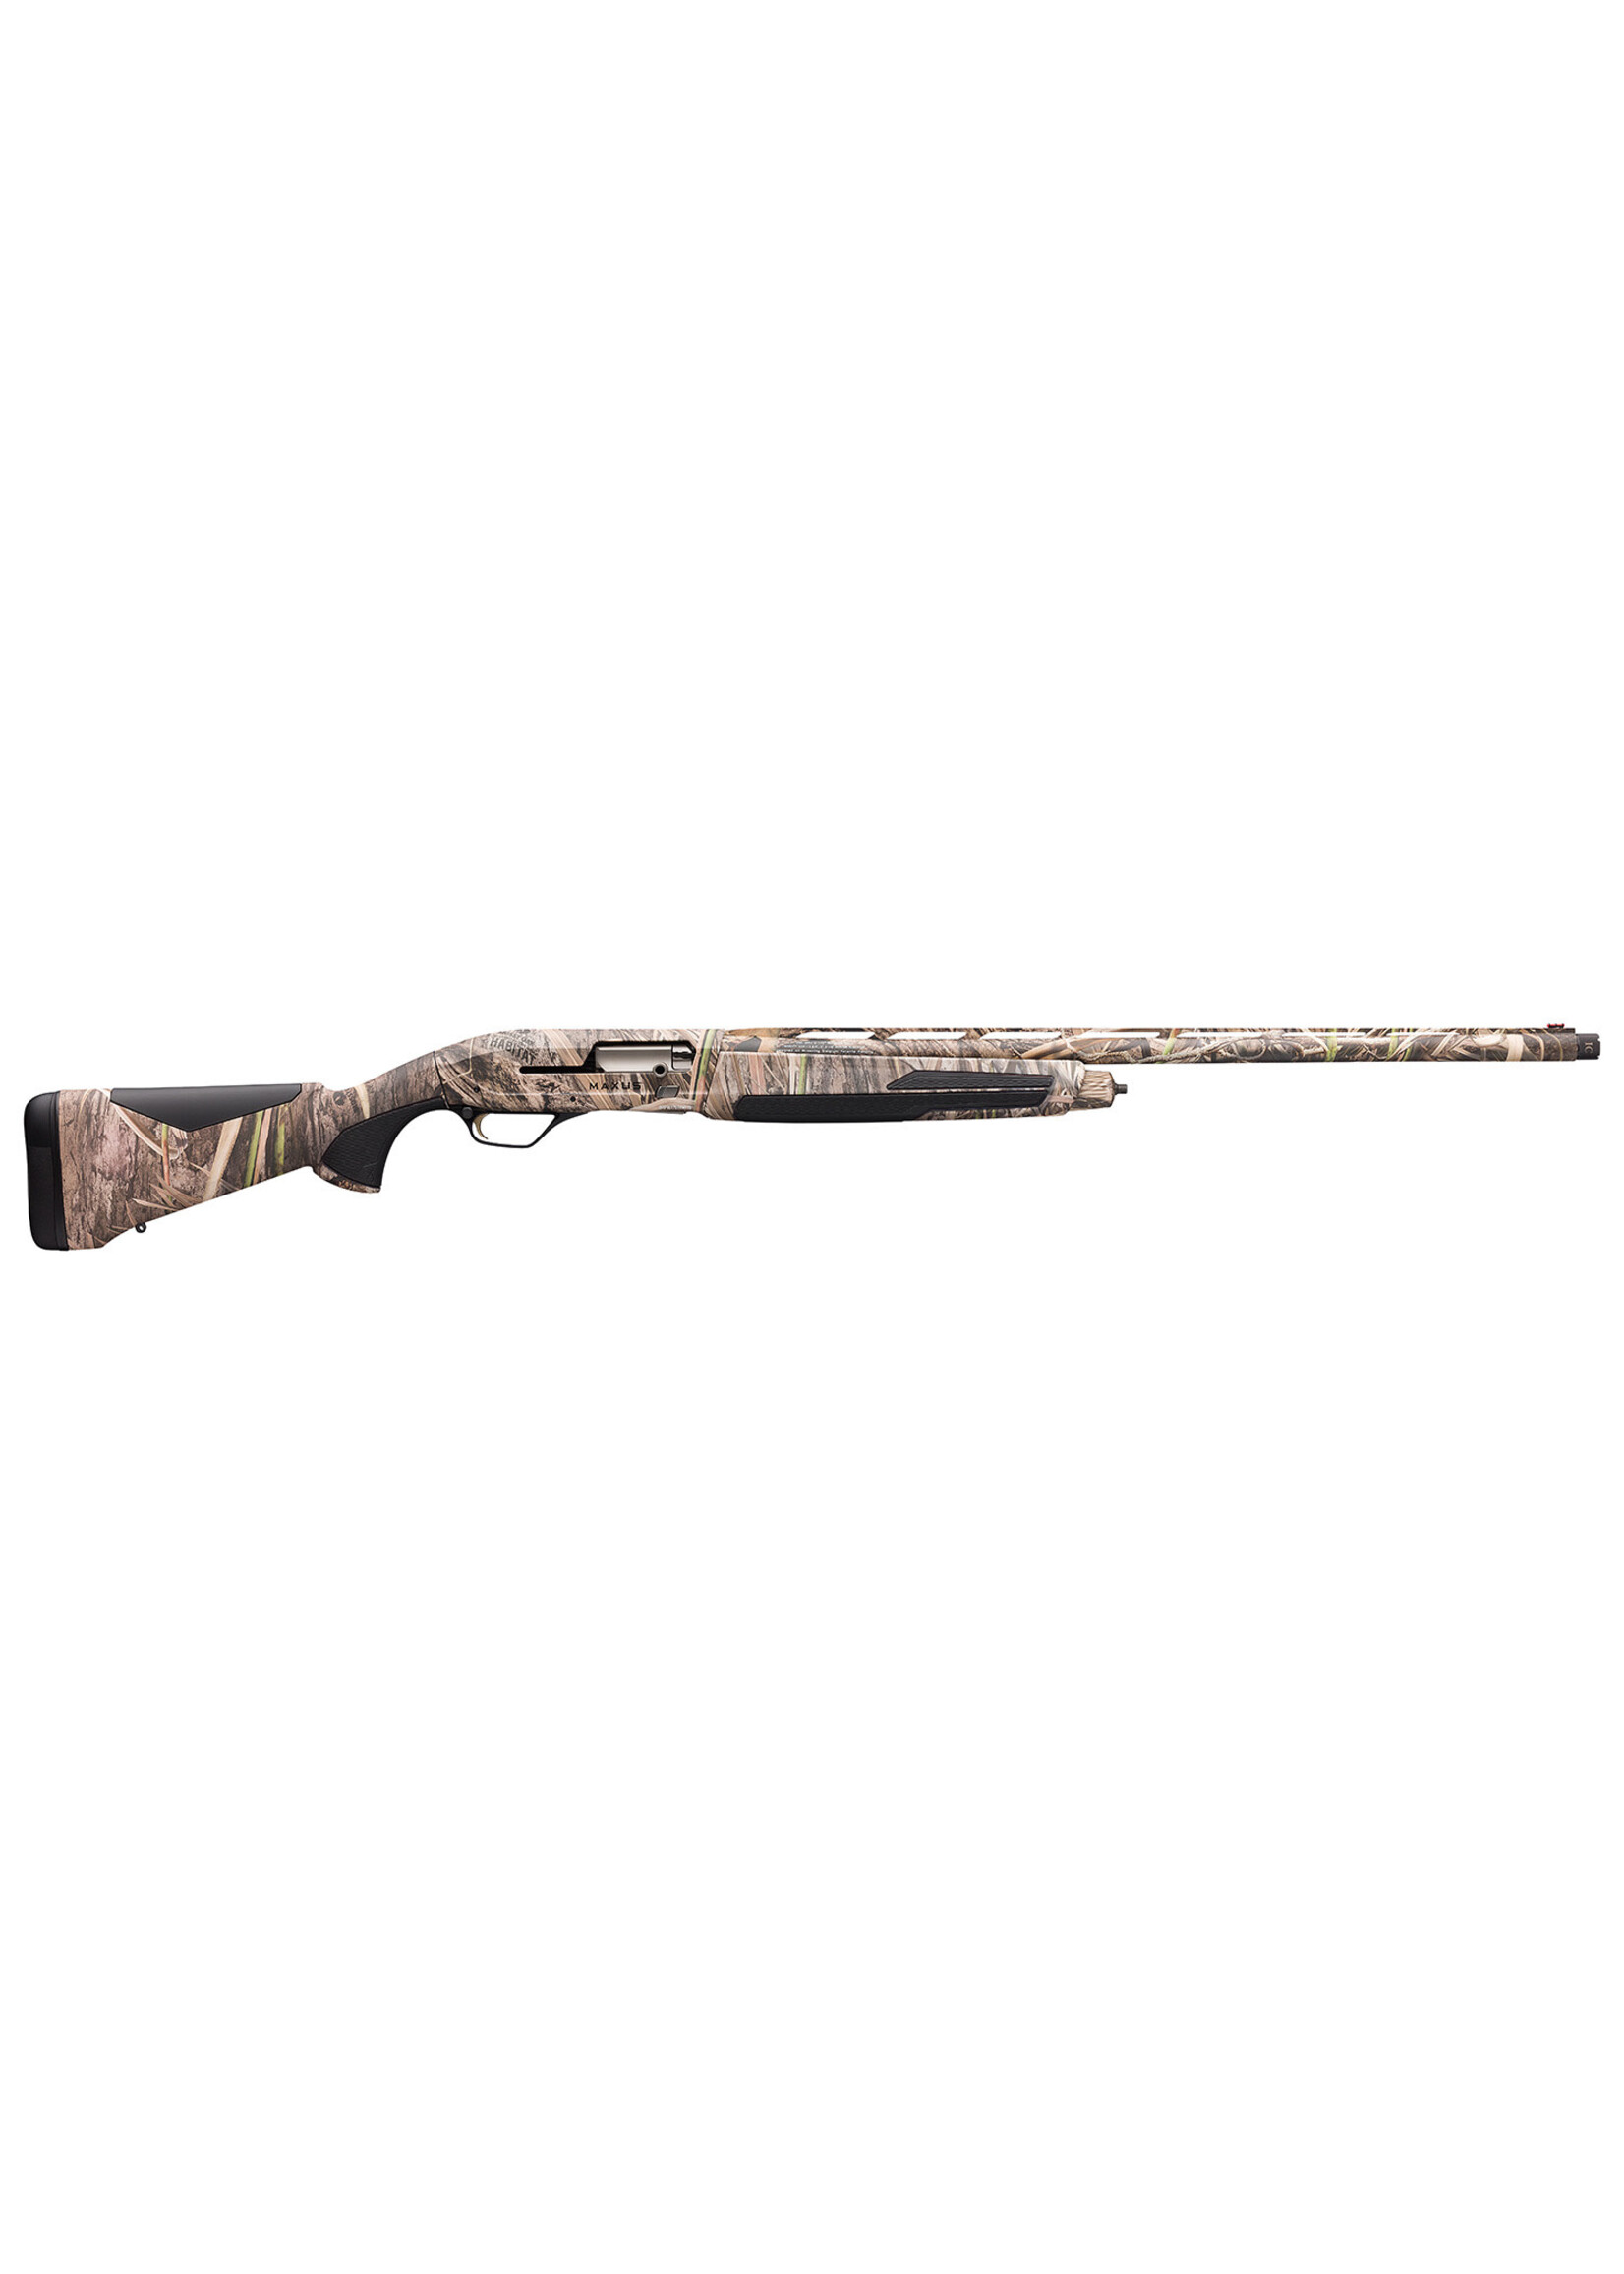 Browning Browning 011701205 Maxus II 12 Gauge with 26" Barrel, 3.5" Chamber, 4+1 Capacity, Overall Mossy Oak Shadow Grass Habitat Finish & Fixed with Overmolded Grip Panels Stock Right Hand (Full Size)